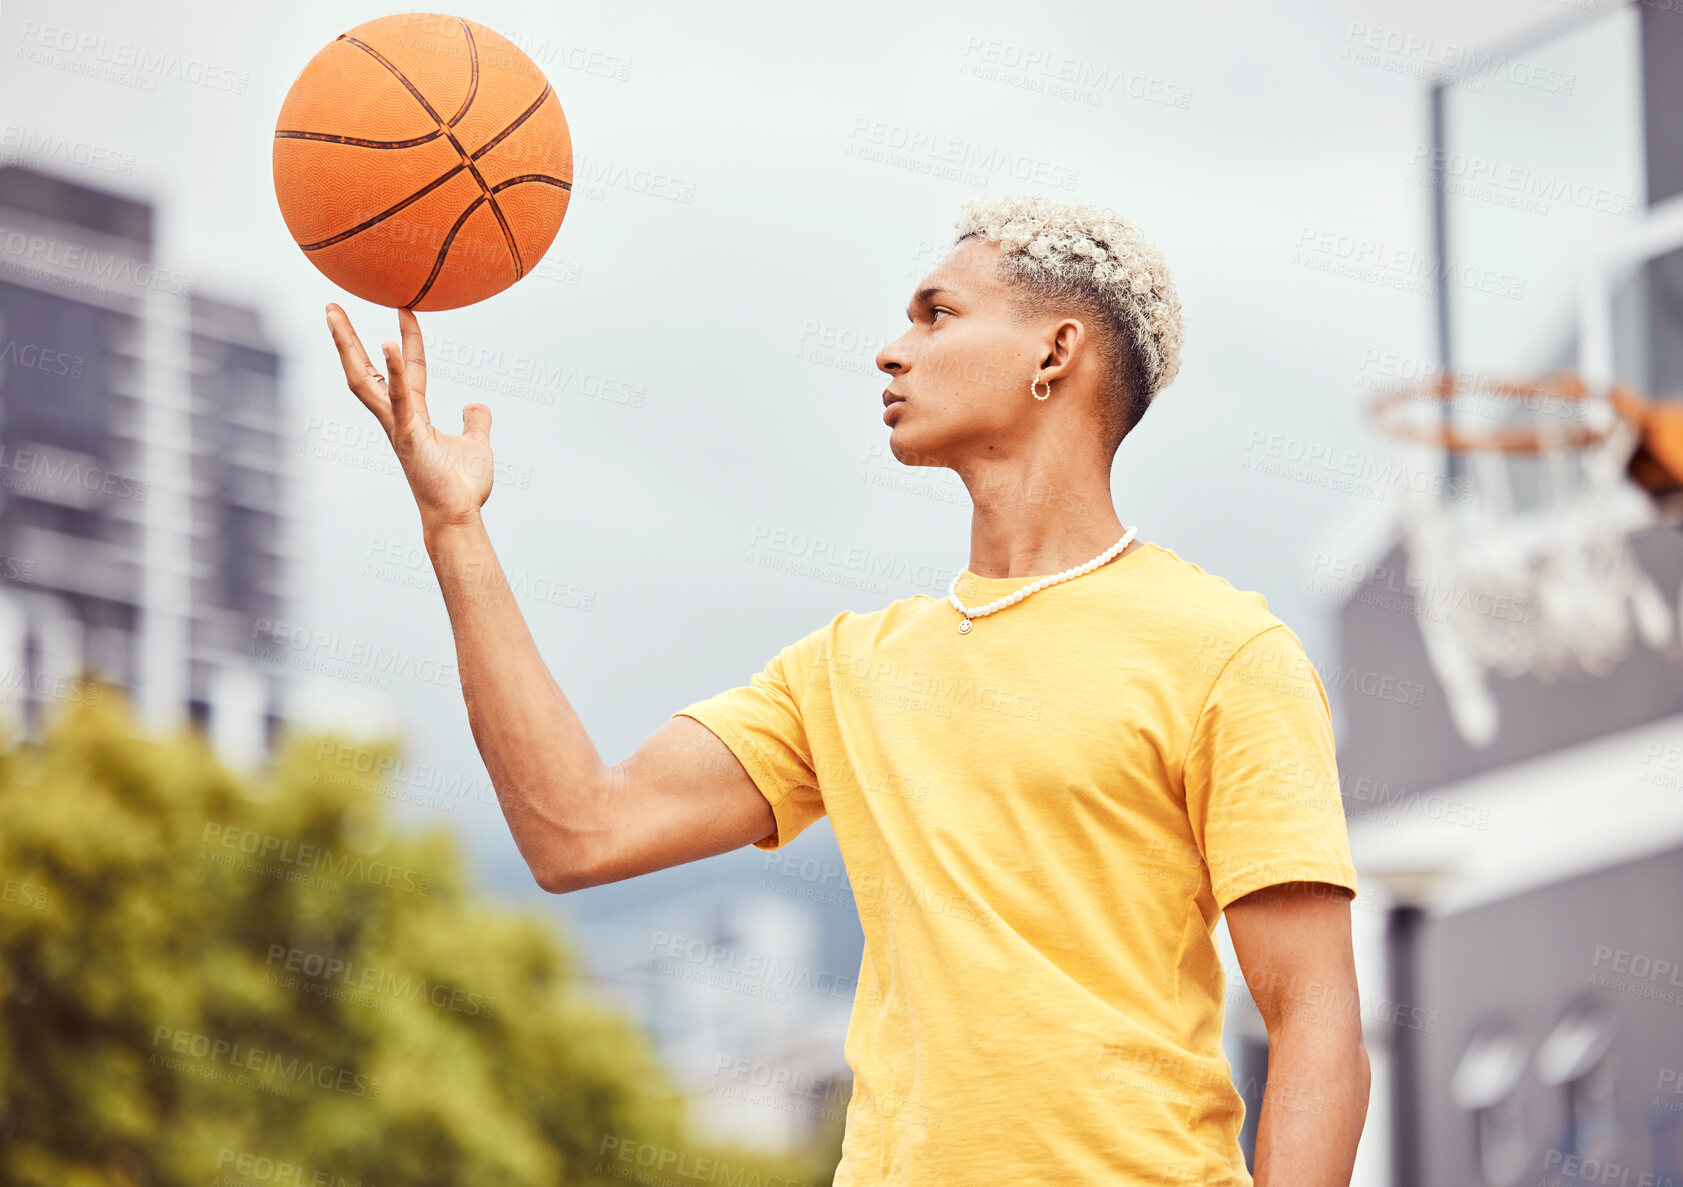 Buy stock photo Sports, fitness and man spinning basketball on court outdoors before workout, exercise or practice. Basketball court, balance and young male player with ball on finger getting ready for training.